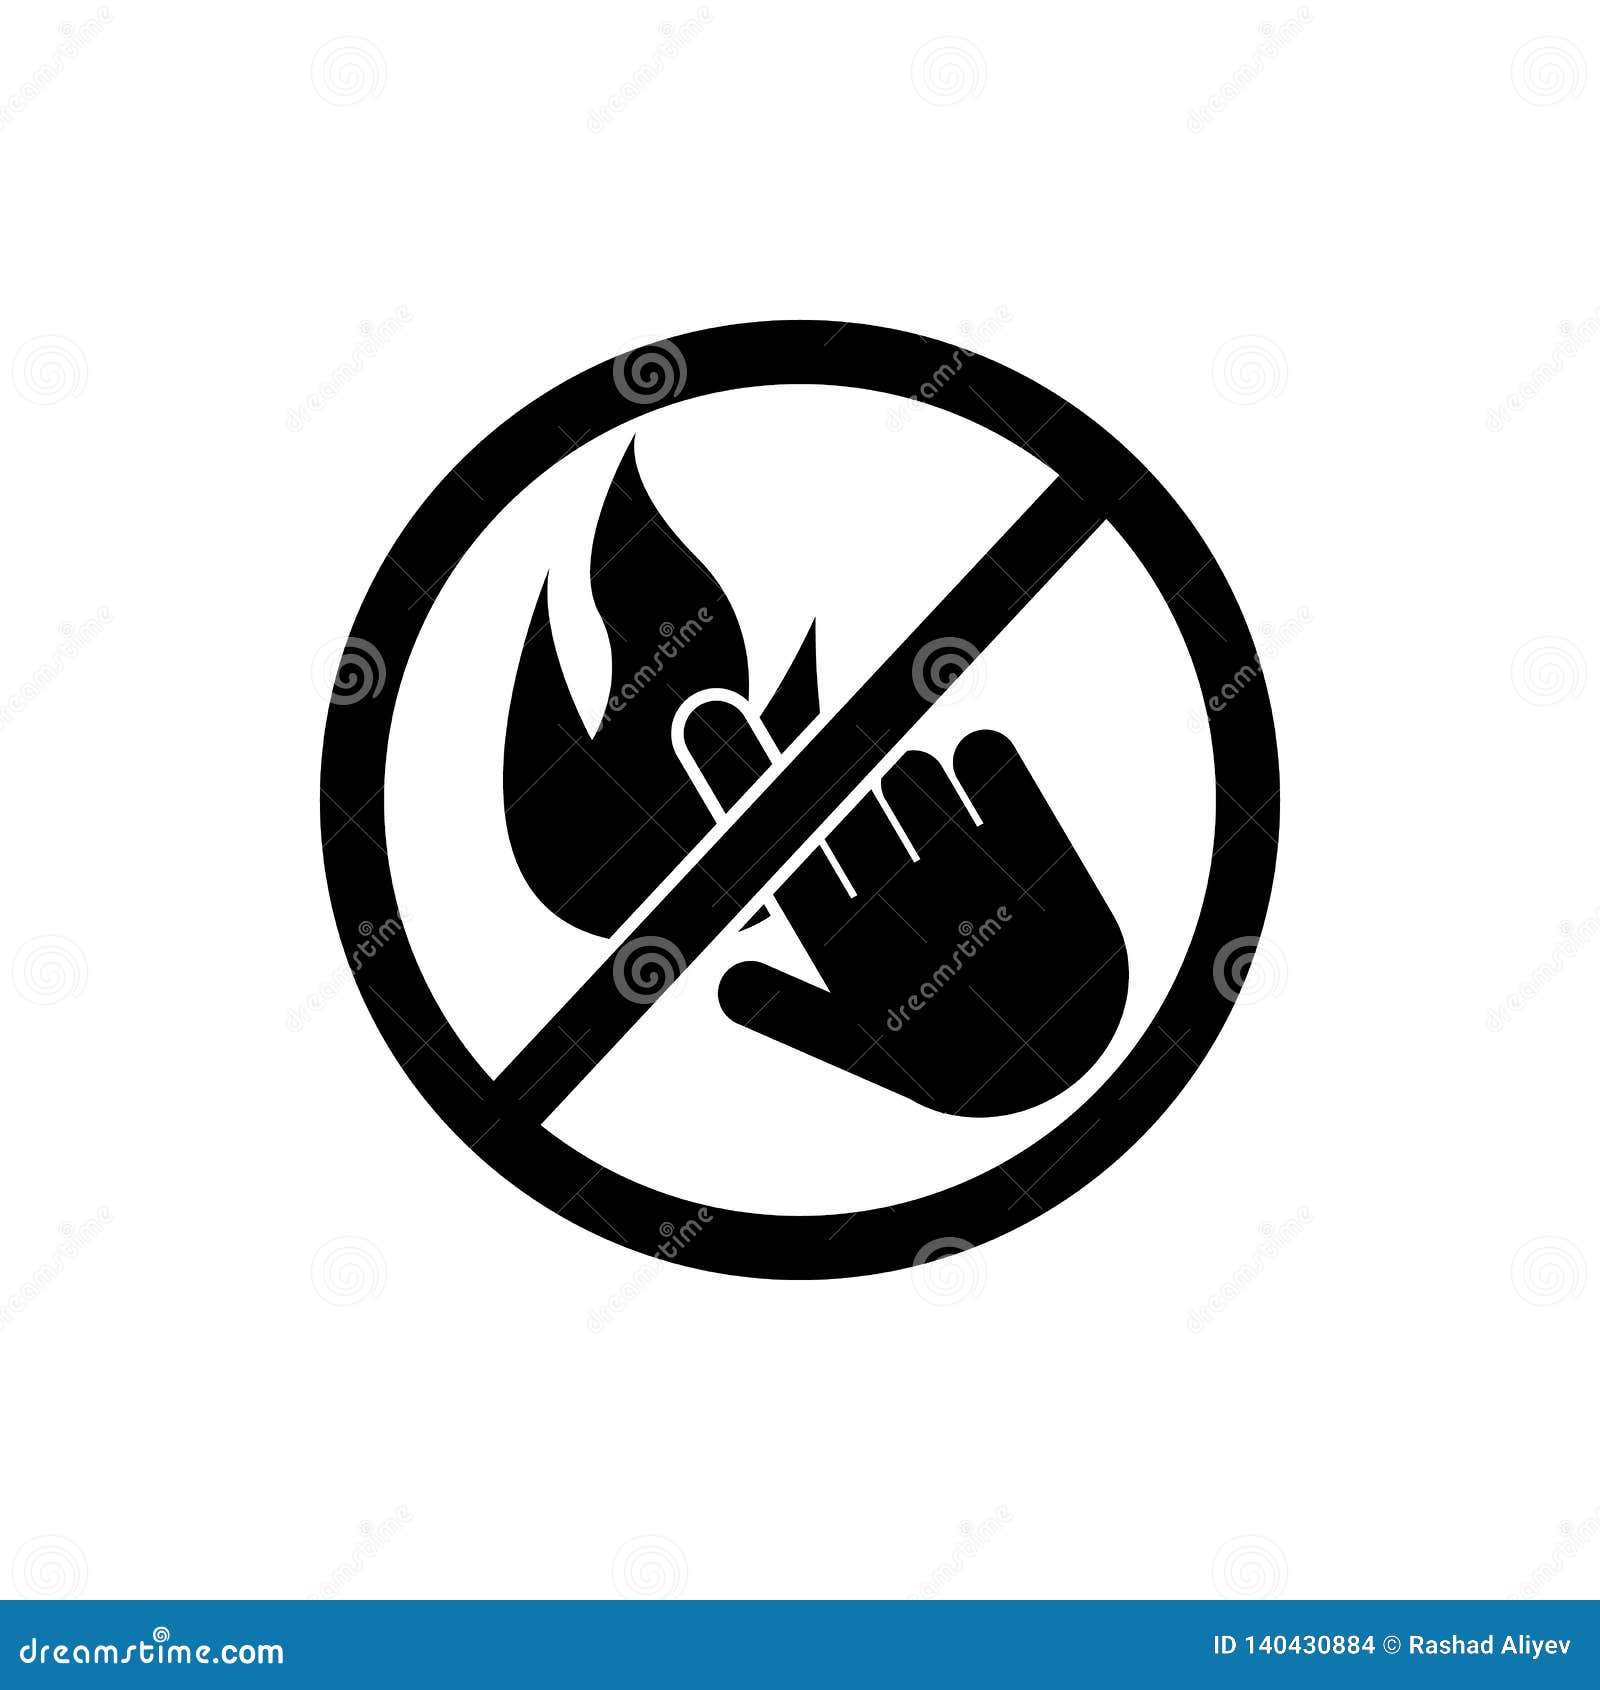 https://thumbs.dreamstime.com/z/don-t-touch-fire-icon-element-prohibition-sign-icon-premium-quality-graphic-design-icon-signs-symbols-collection-icon-don-t-140430884.jpg